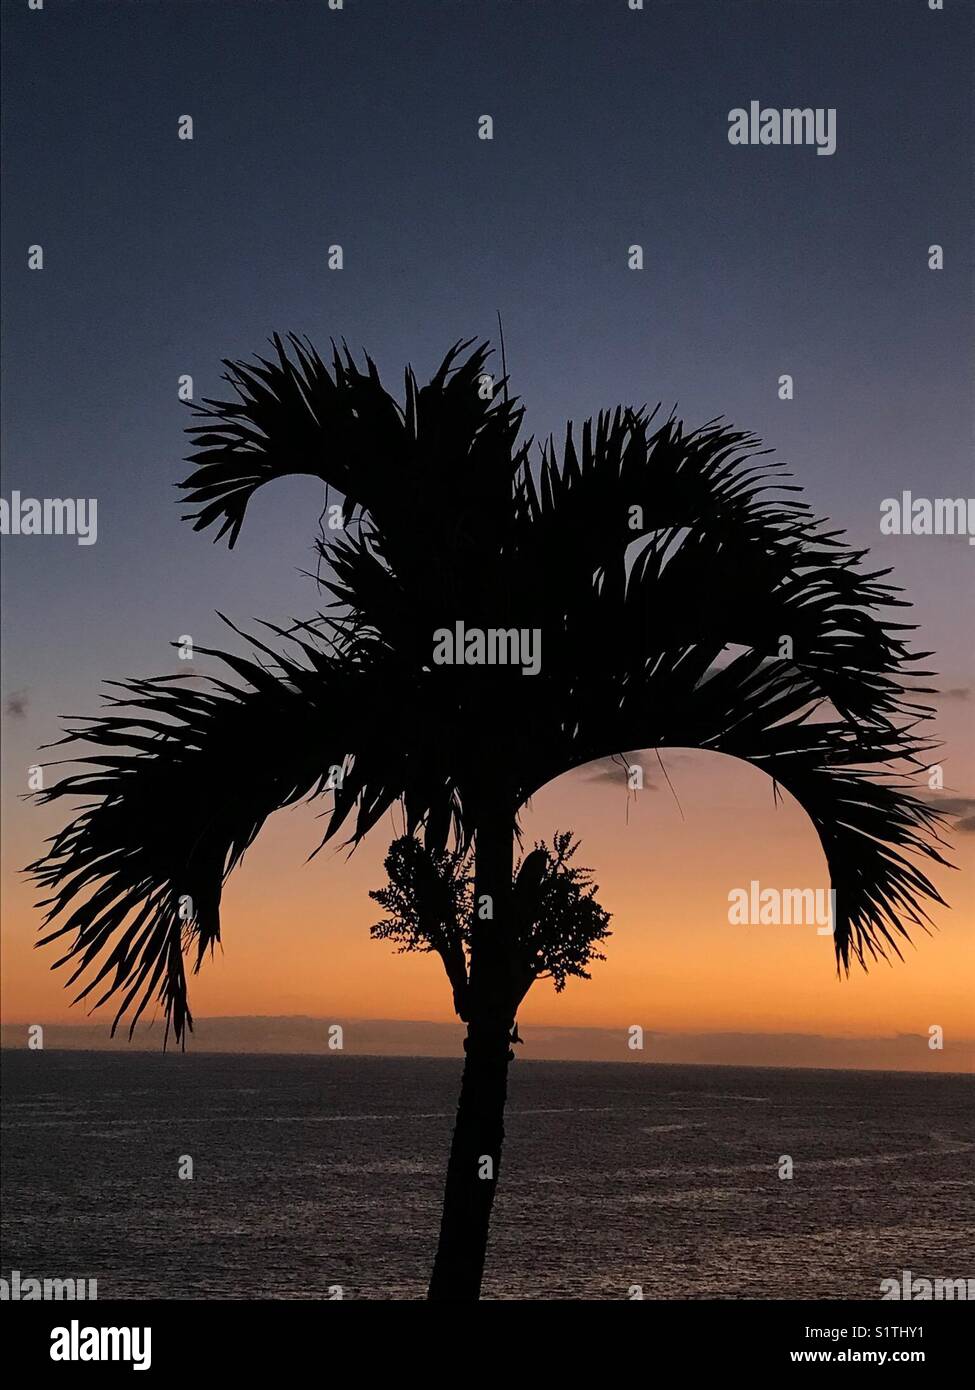 Palm tree silhouetted against a sunset sky Banque D'Images